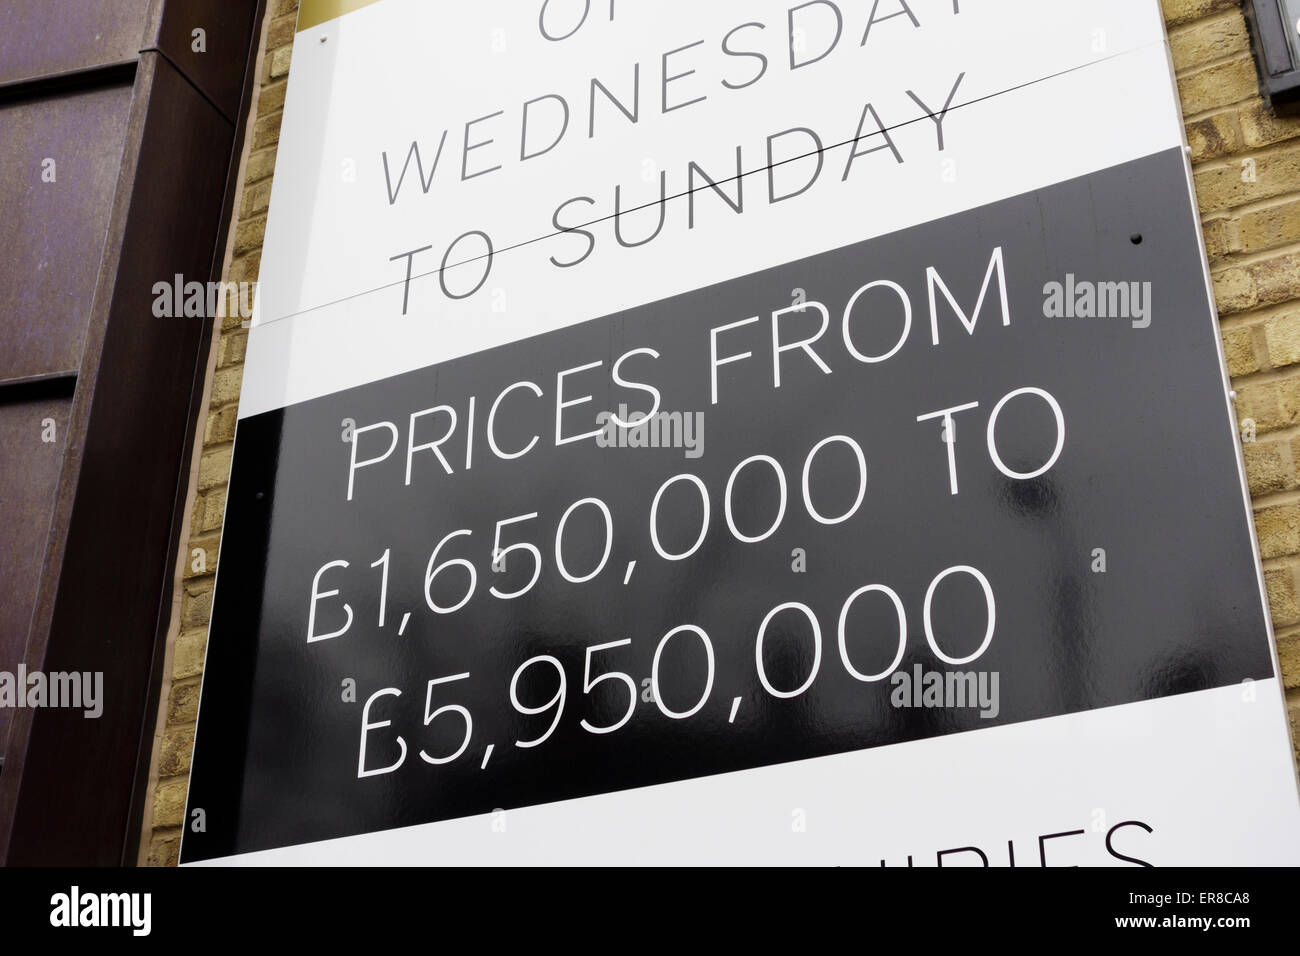 Open day sign for extremely expensive apartments, Wapping, London Stock Photo